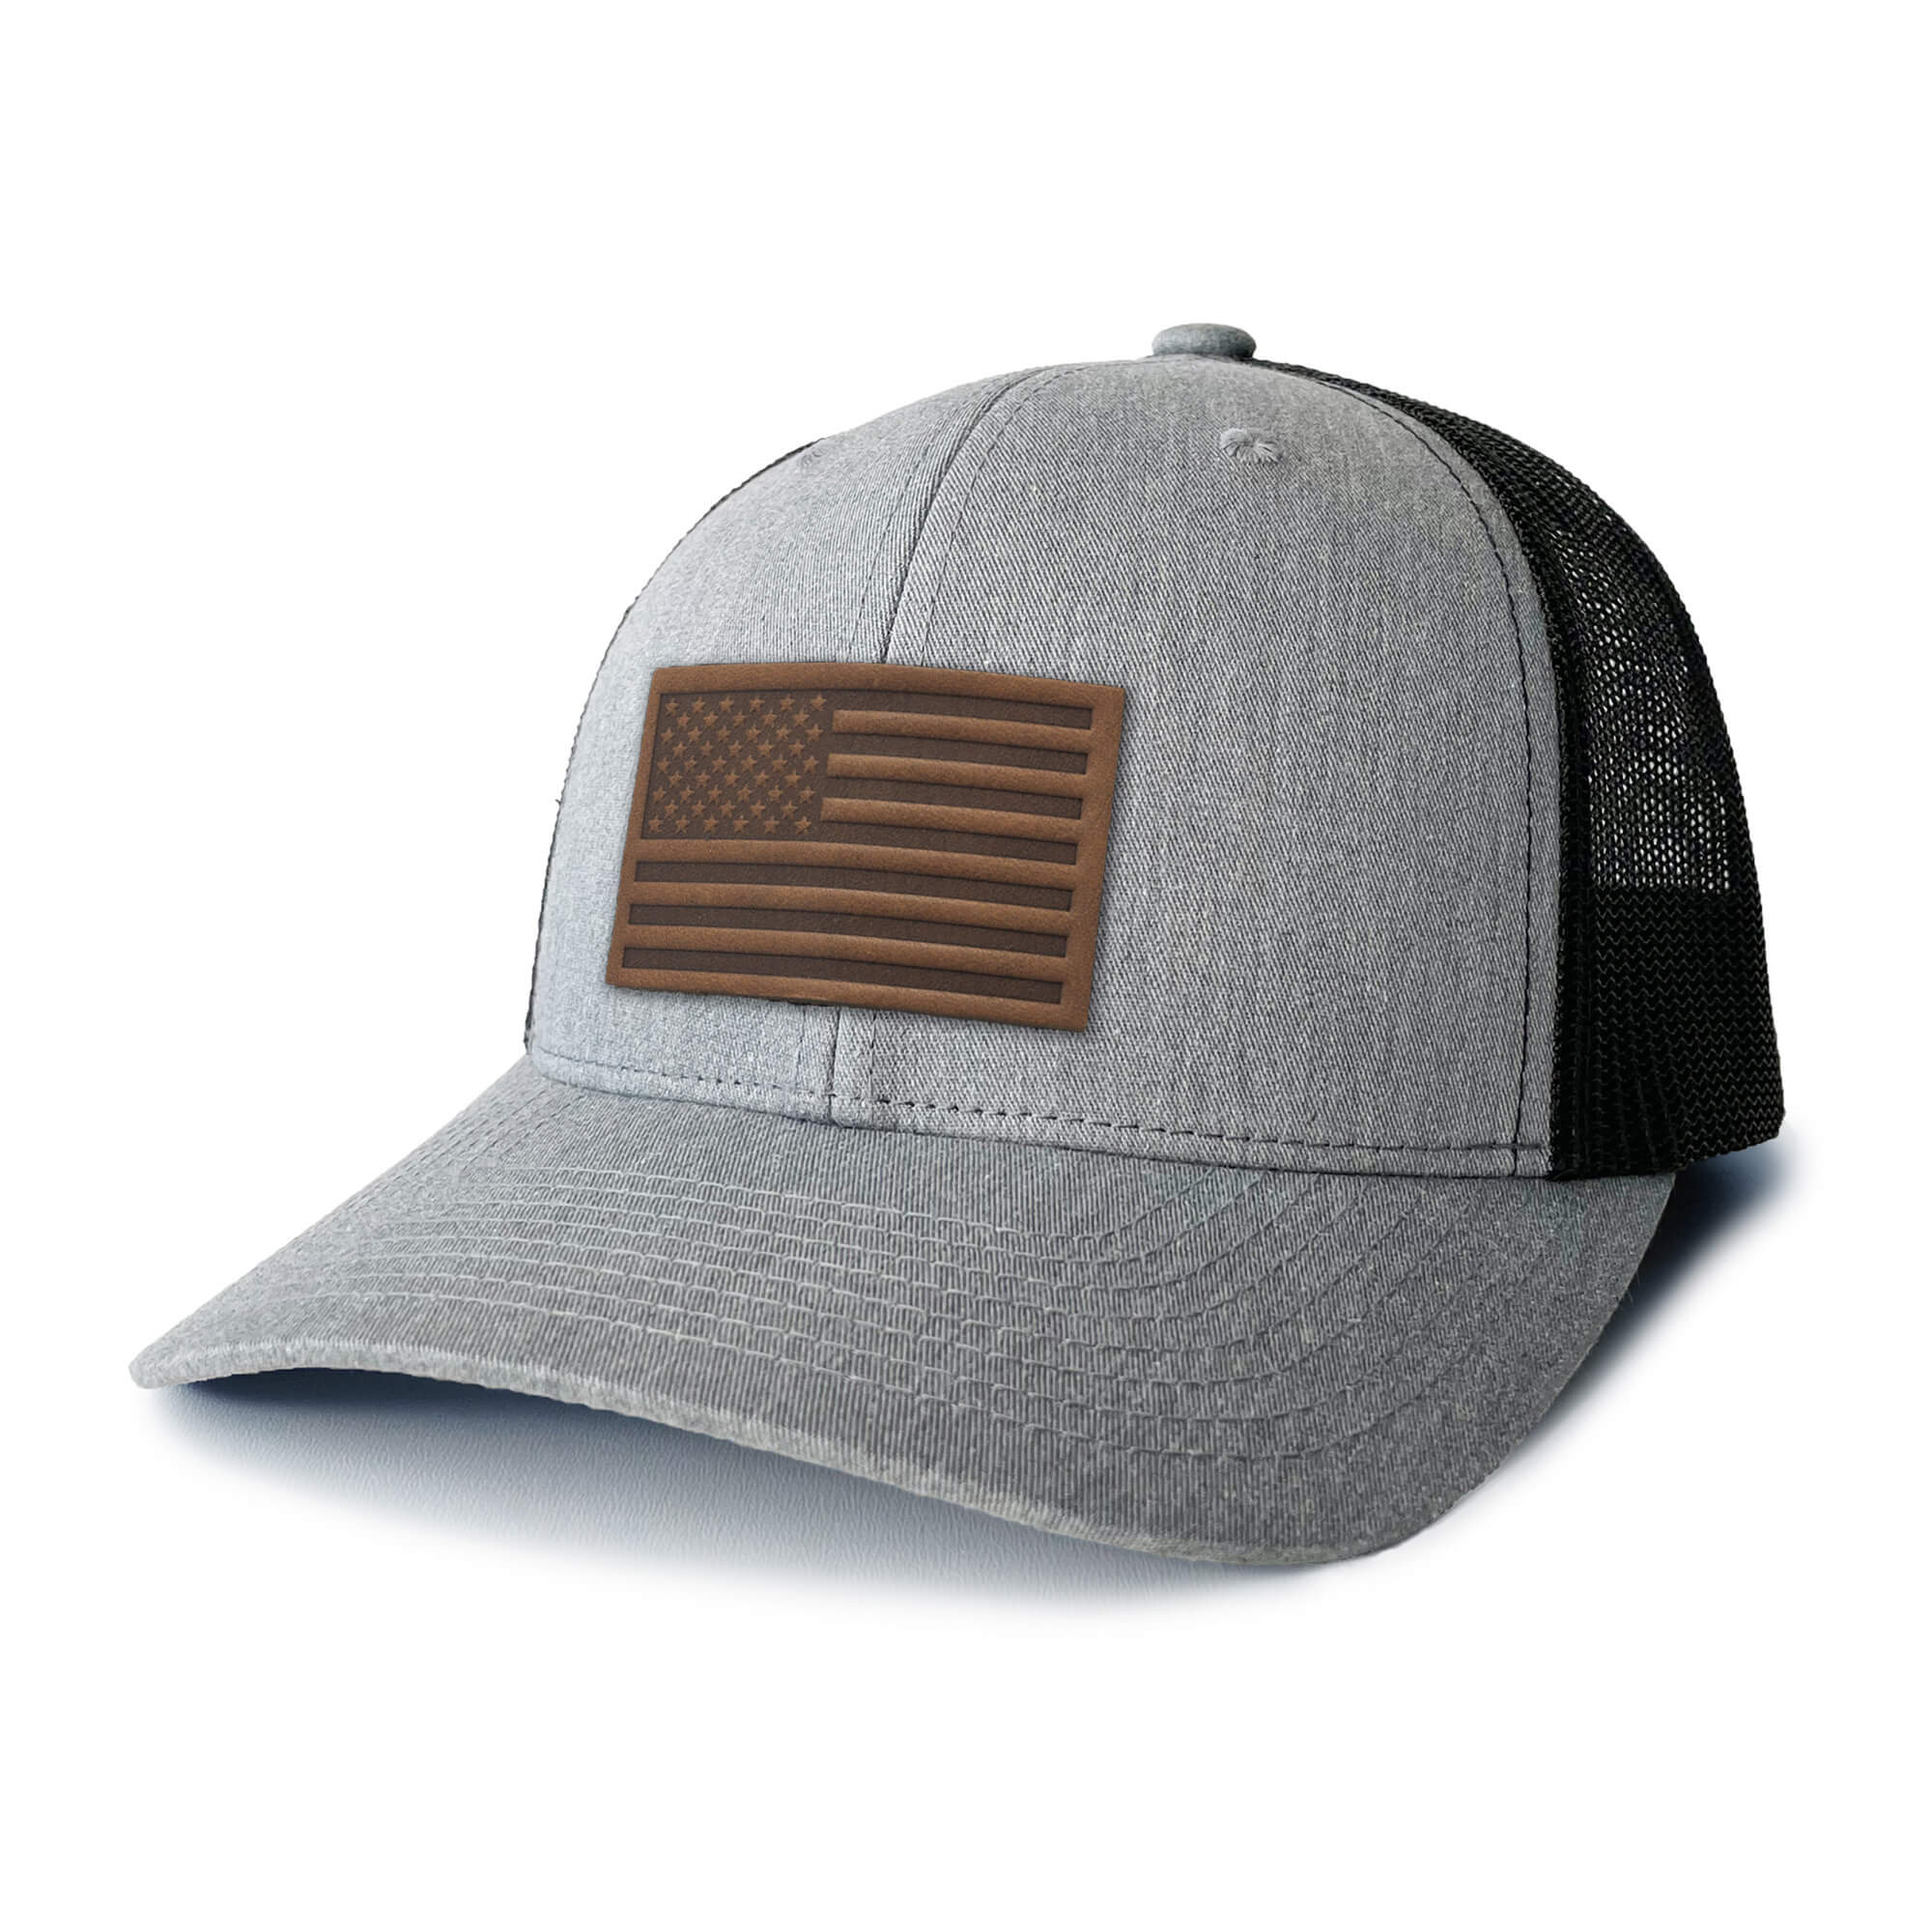 Heather Grey and white trucker hat with full-grain leather patch of USA Flag | BLACK-003-012, CHARC-003-012, NAVY-003-012, HGREY-003-012, MOSS-003-012, BROWN-003-012